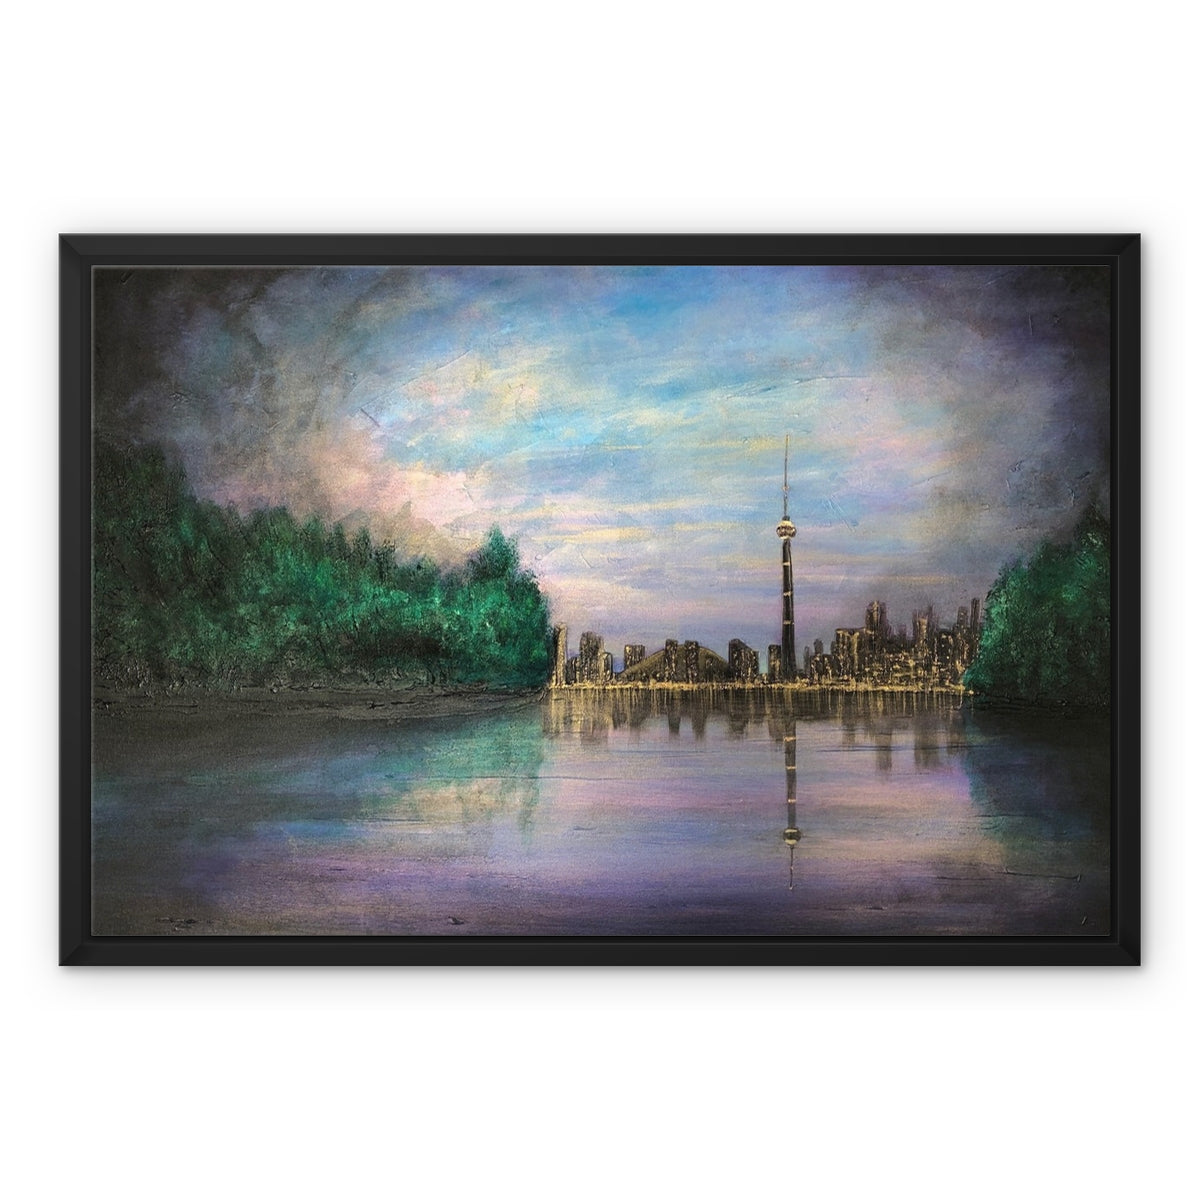 Toronto Last Light Painting | Framed Canvas From Scotland-Floating Framed Canvas Prints-World Art Gallery-24"x18"-Paintings, Prints, Homeware, Art Gifts From Scotland By Scottish Artist Kevin Hunter